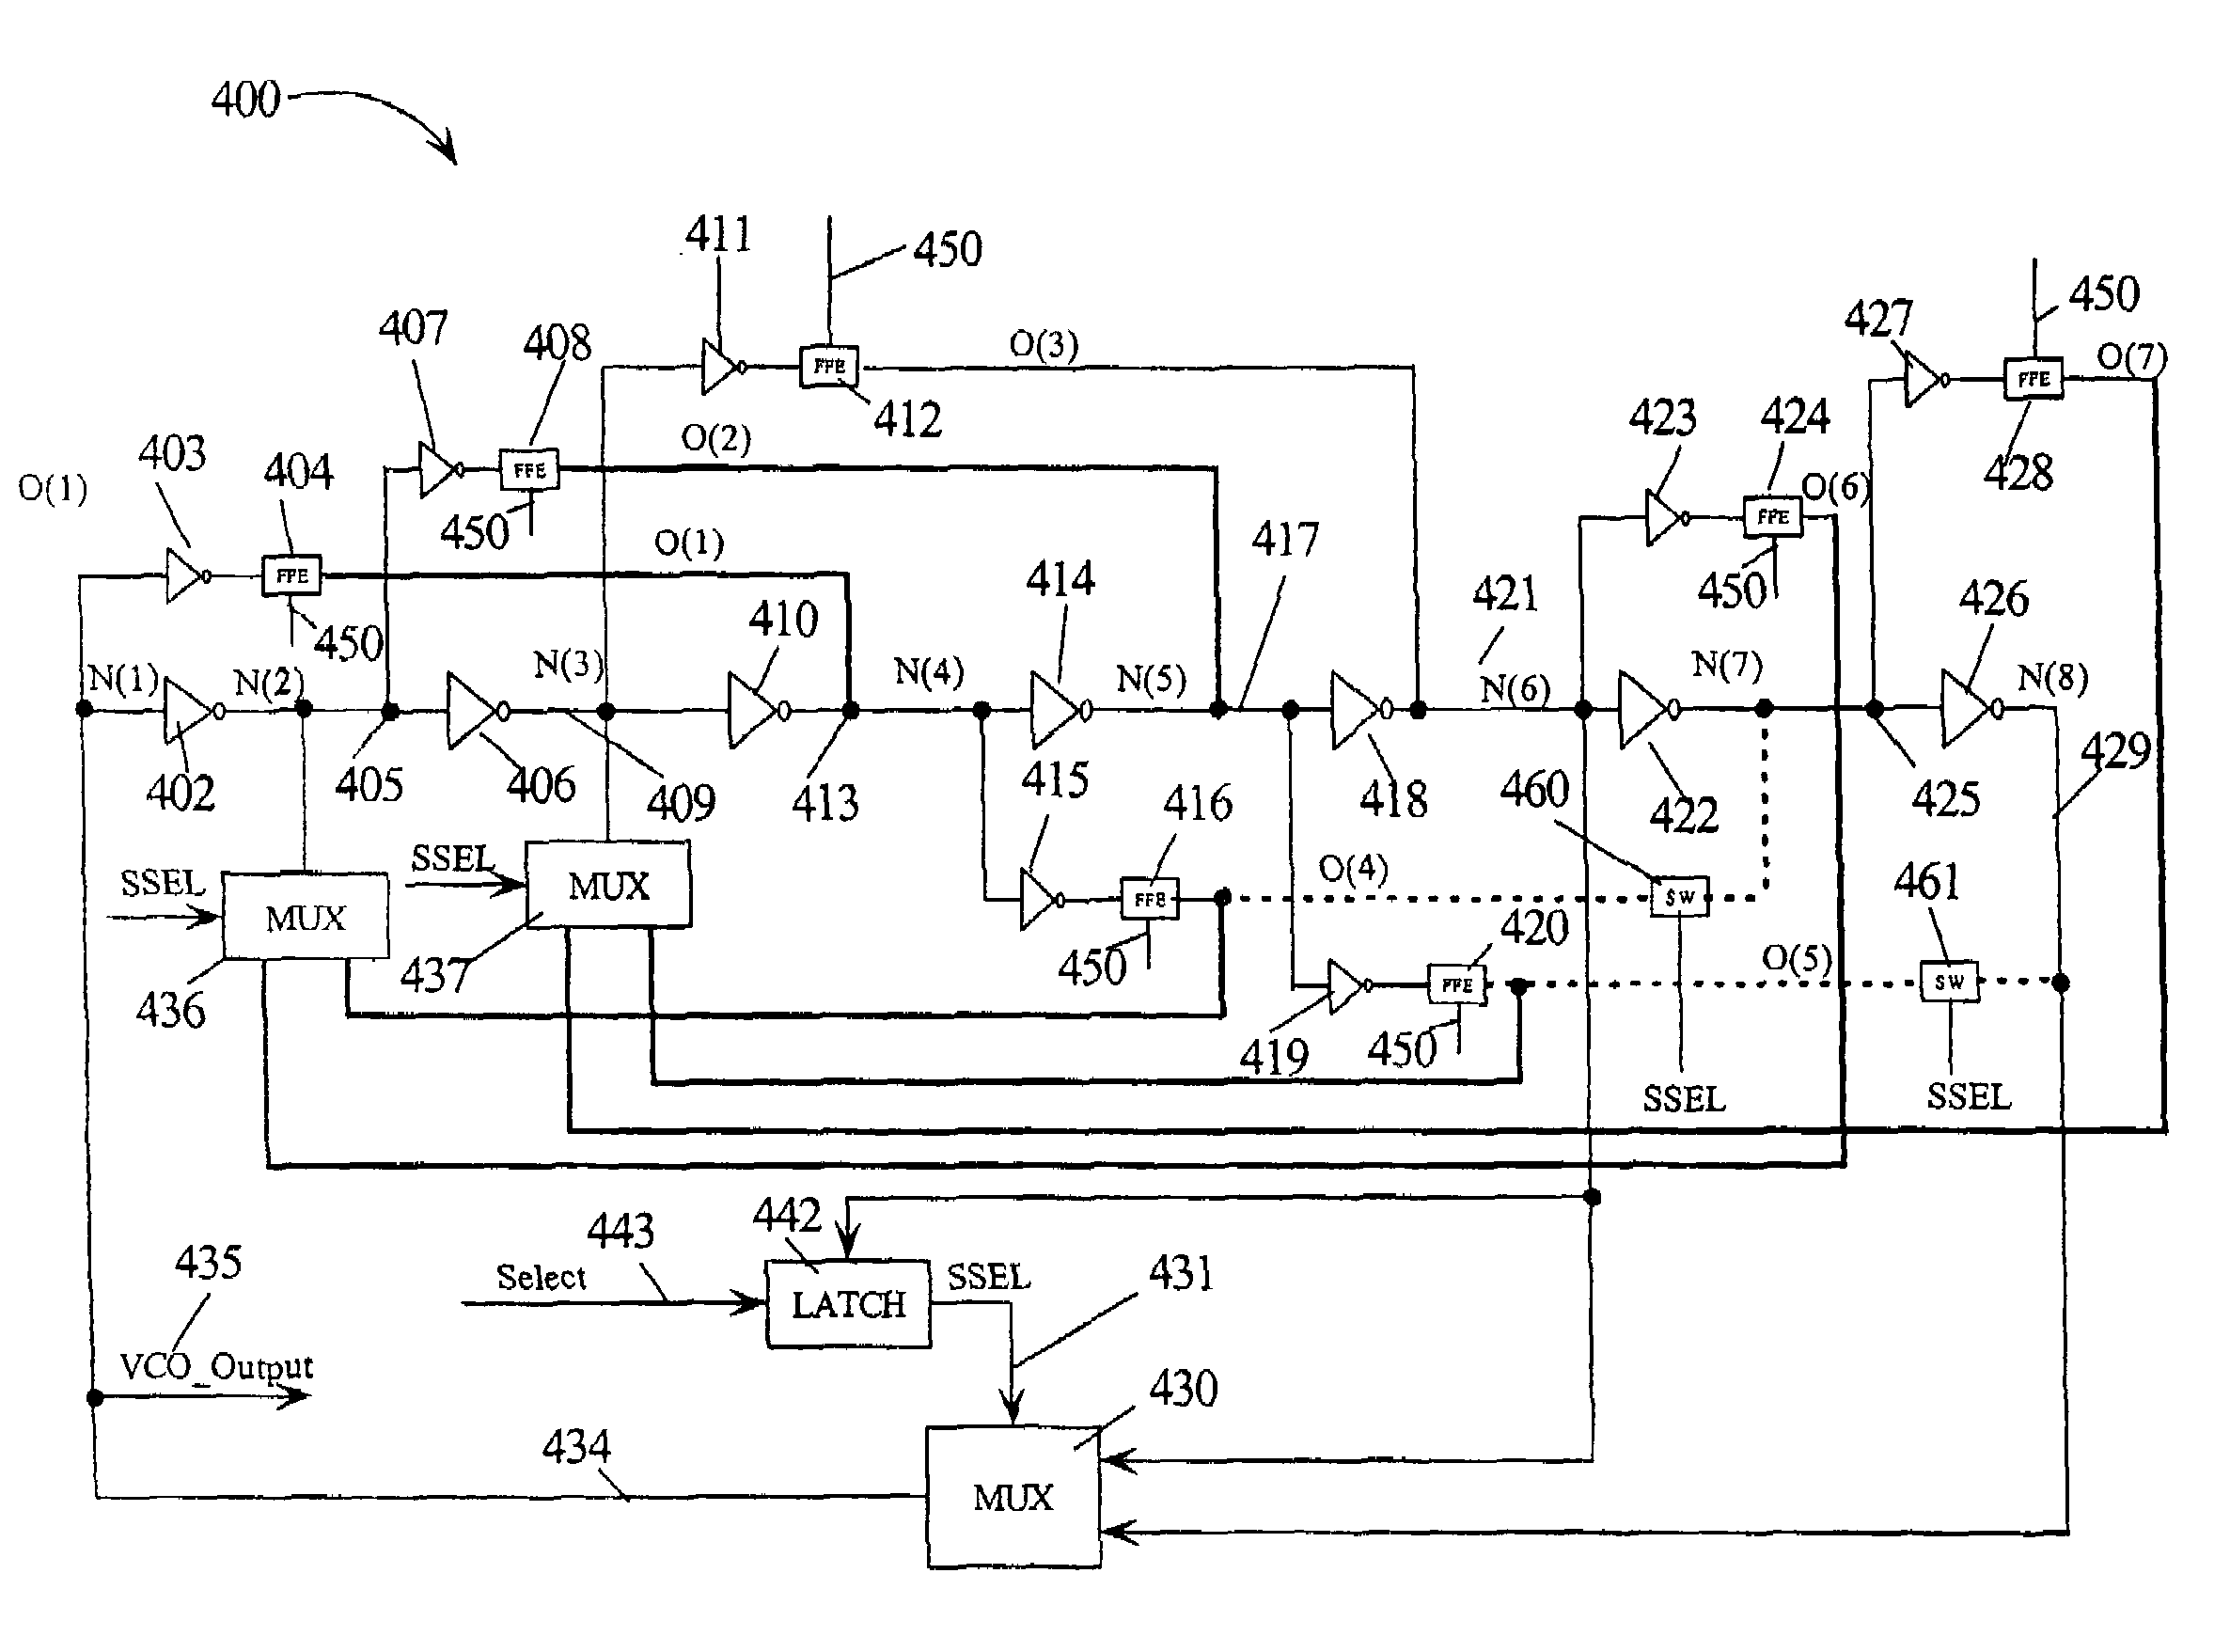 Voltage controlled oscillator with selectable frequency ranges